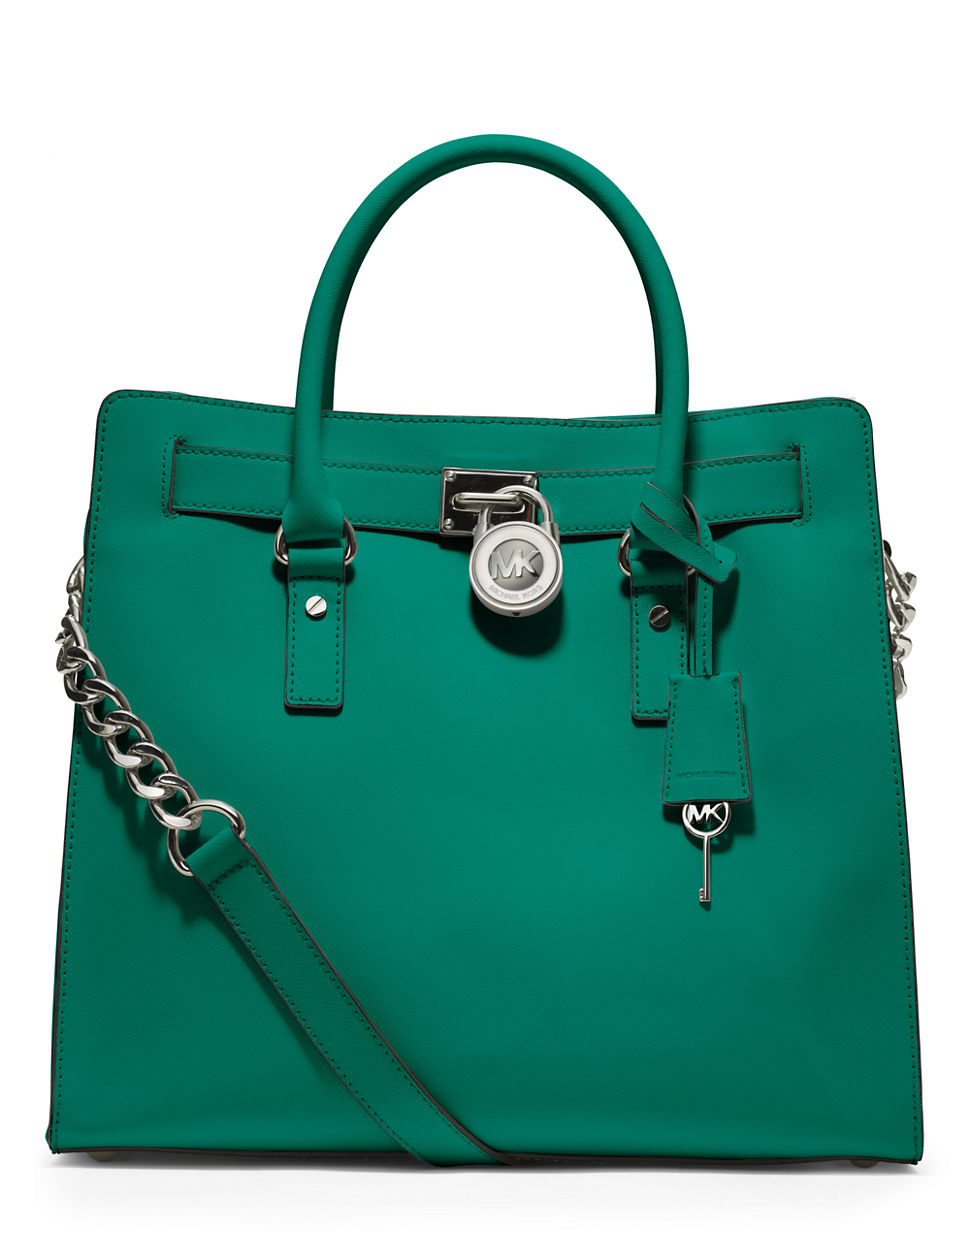 Lyst - Michael Michael Kors Hamilton Leather Large Tote Bag in Green